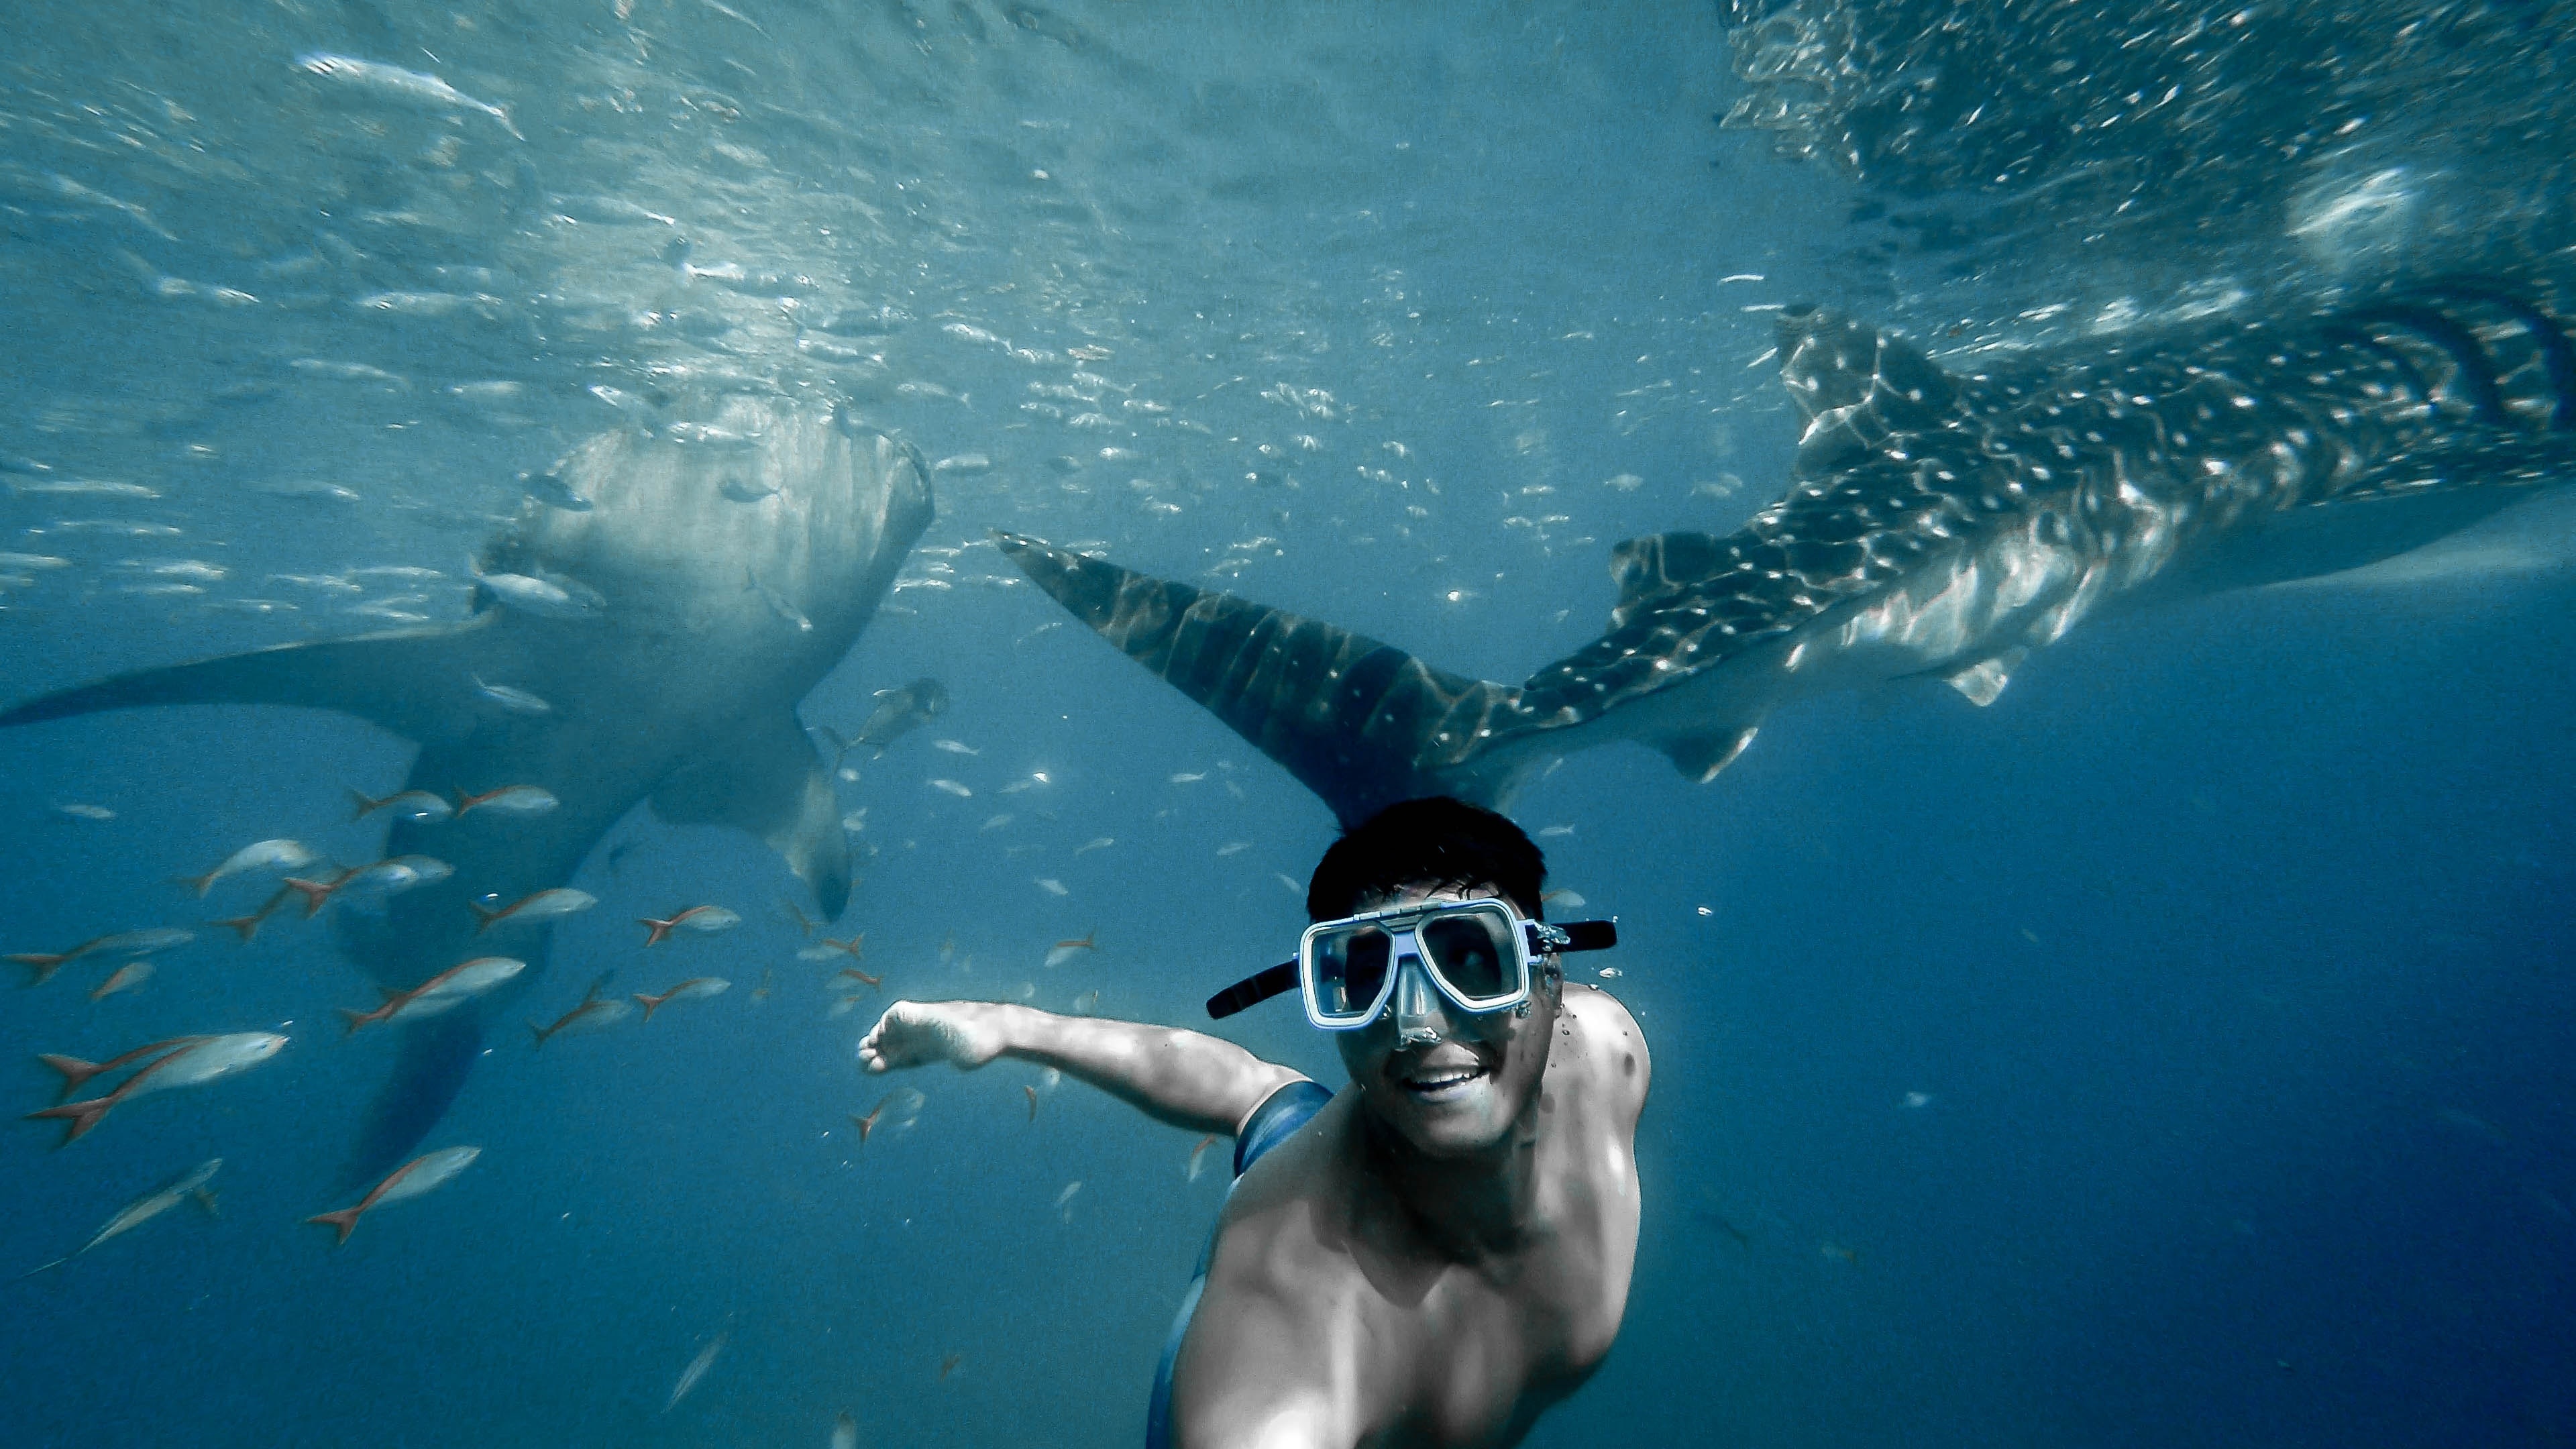 Snorkeling: Whale sharks, A diving mask, Scuba diving, A dive experience. 3840x2160 4K Wallpaper.